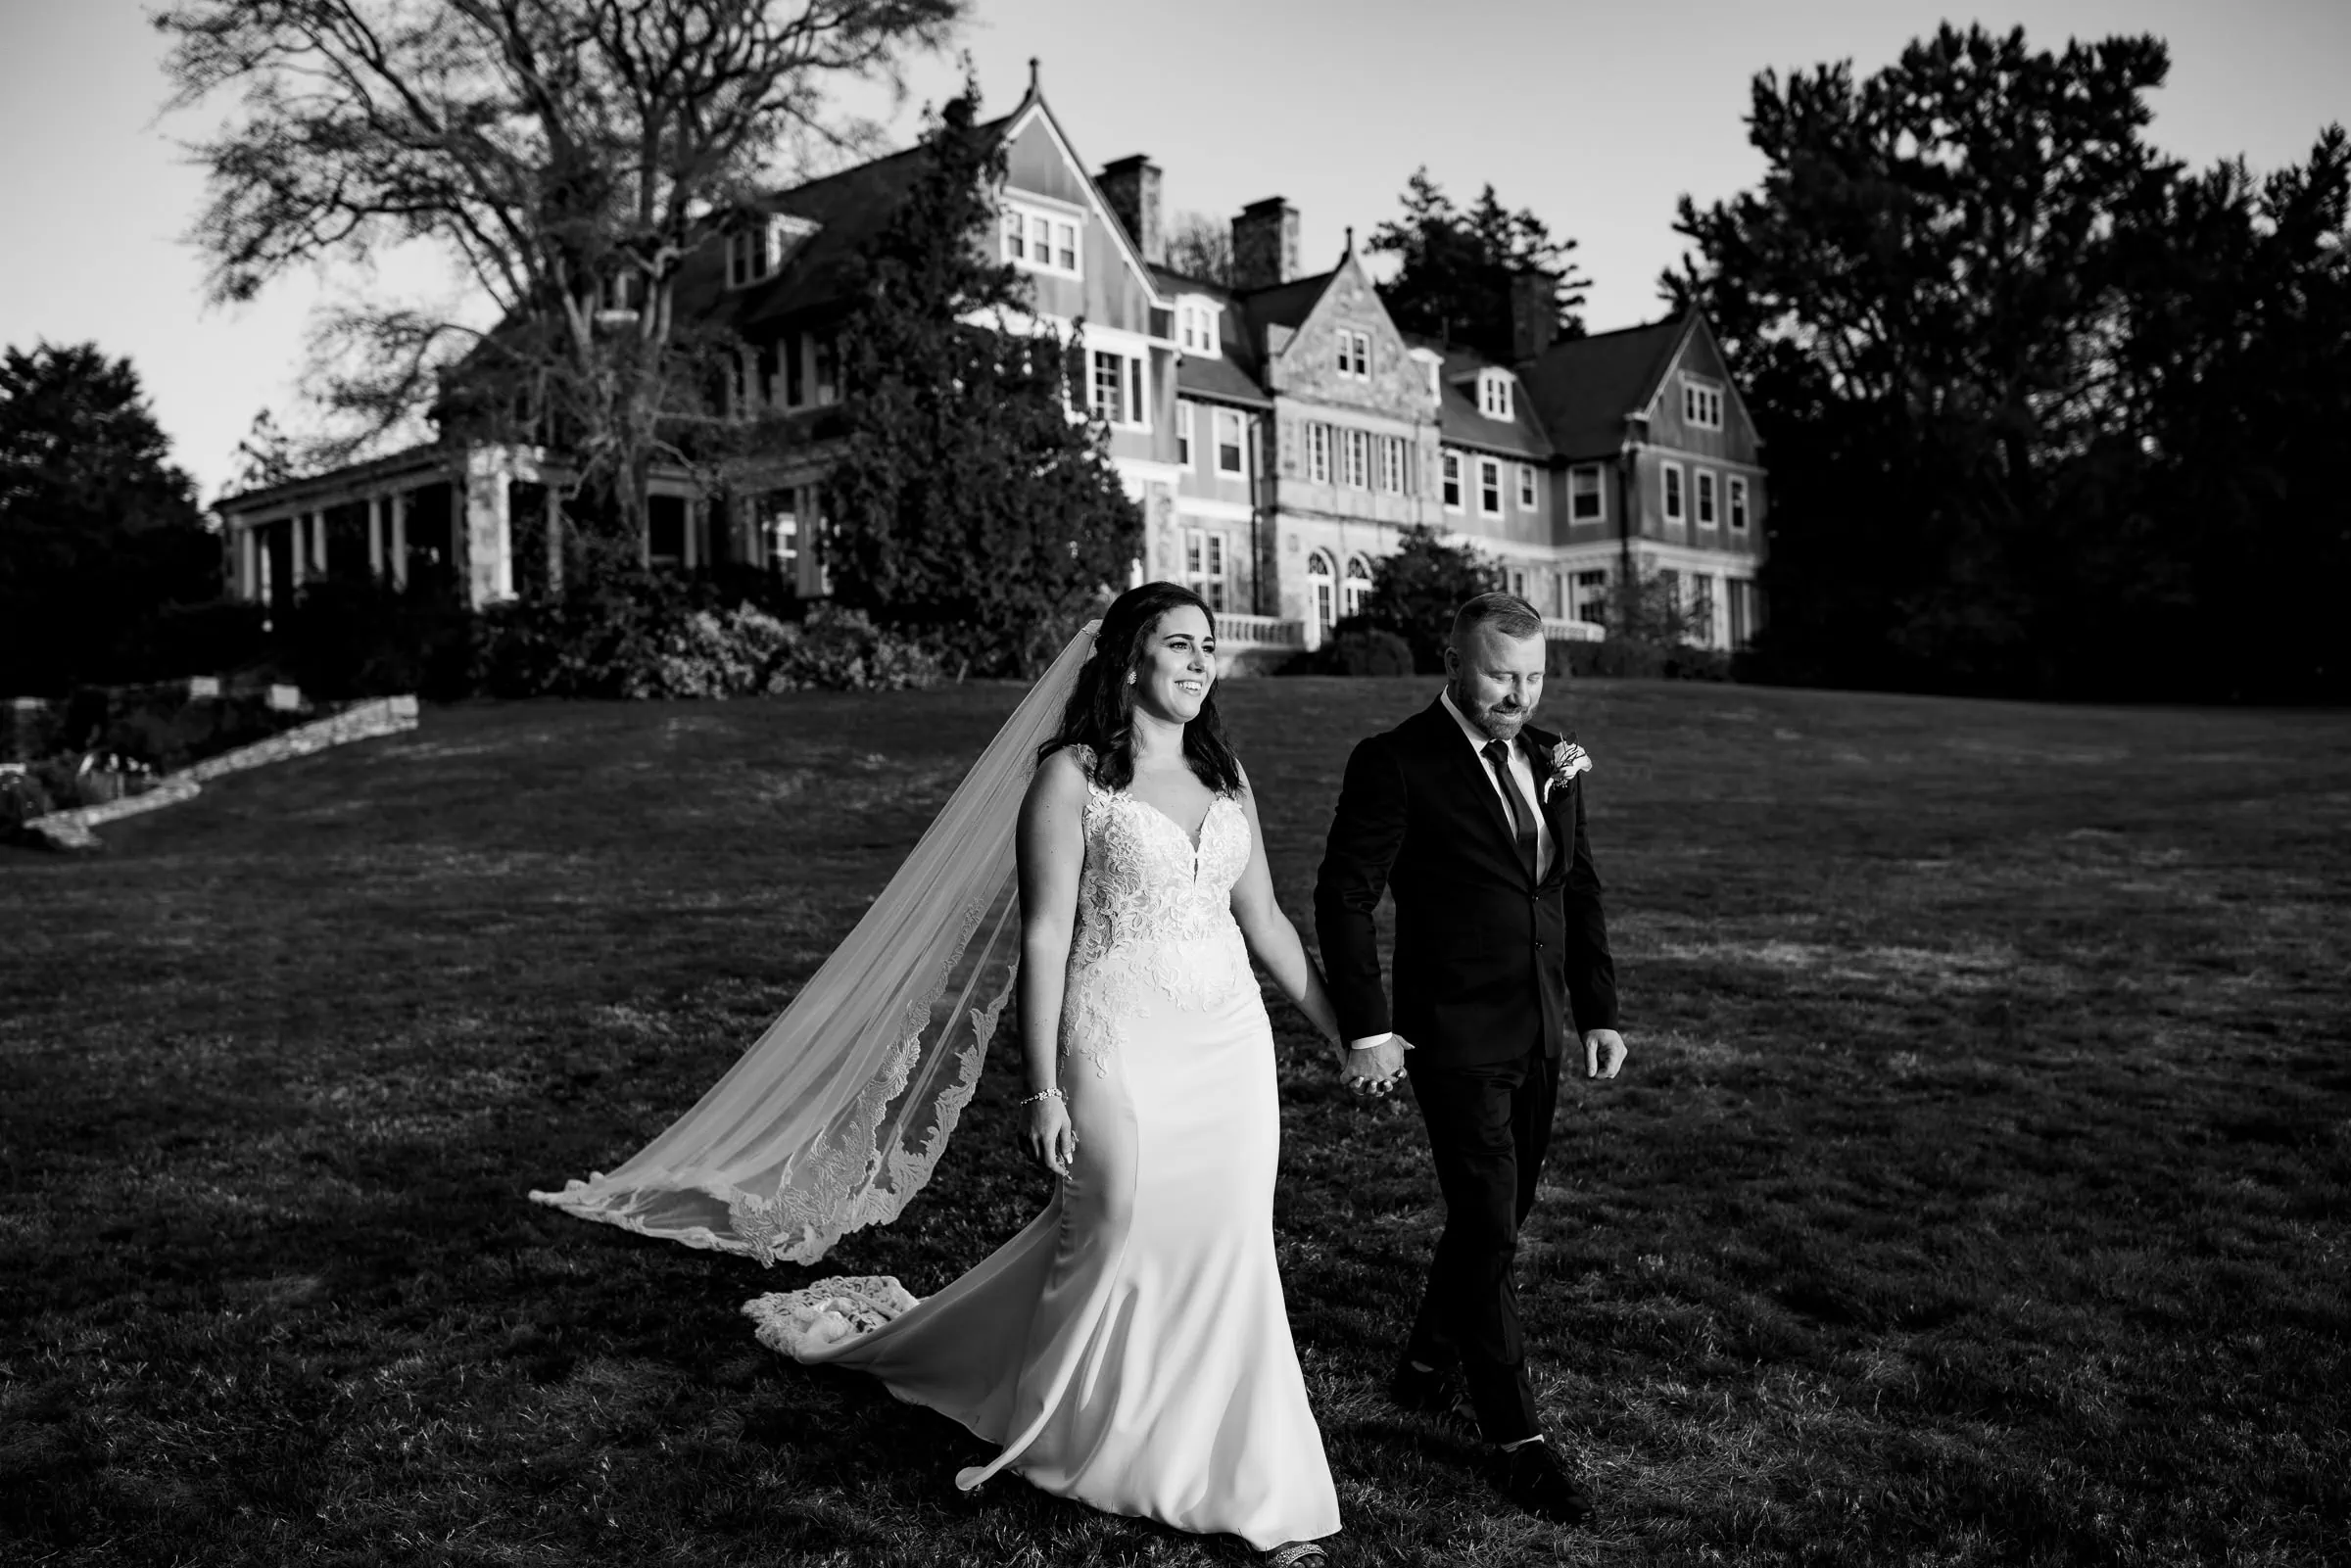 A bride in white dress and veil holds hand with a groom in a suit as they walk down a hill away from Blithewold Mansion a top rhode island wedding venue